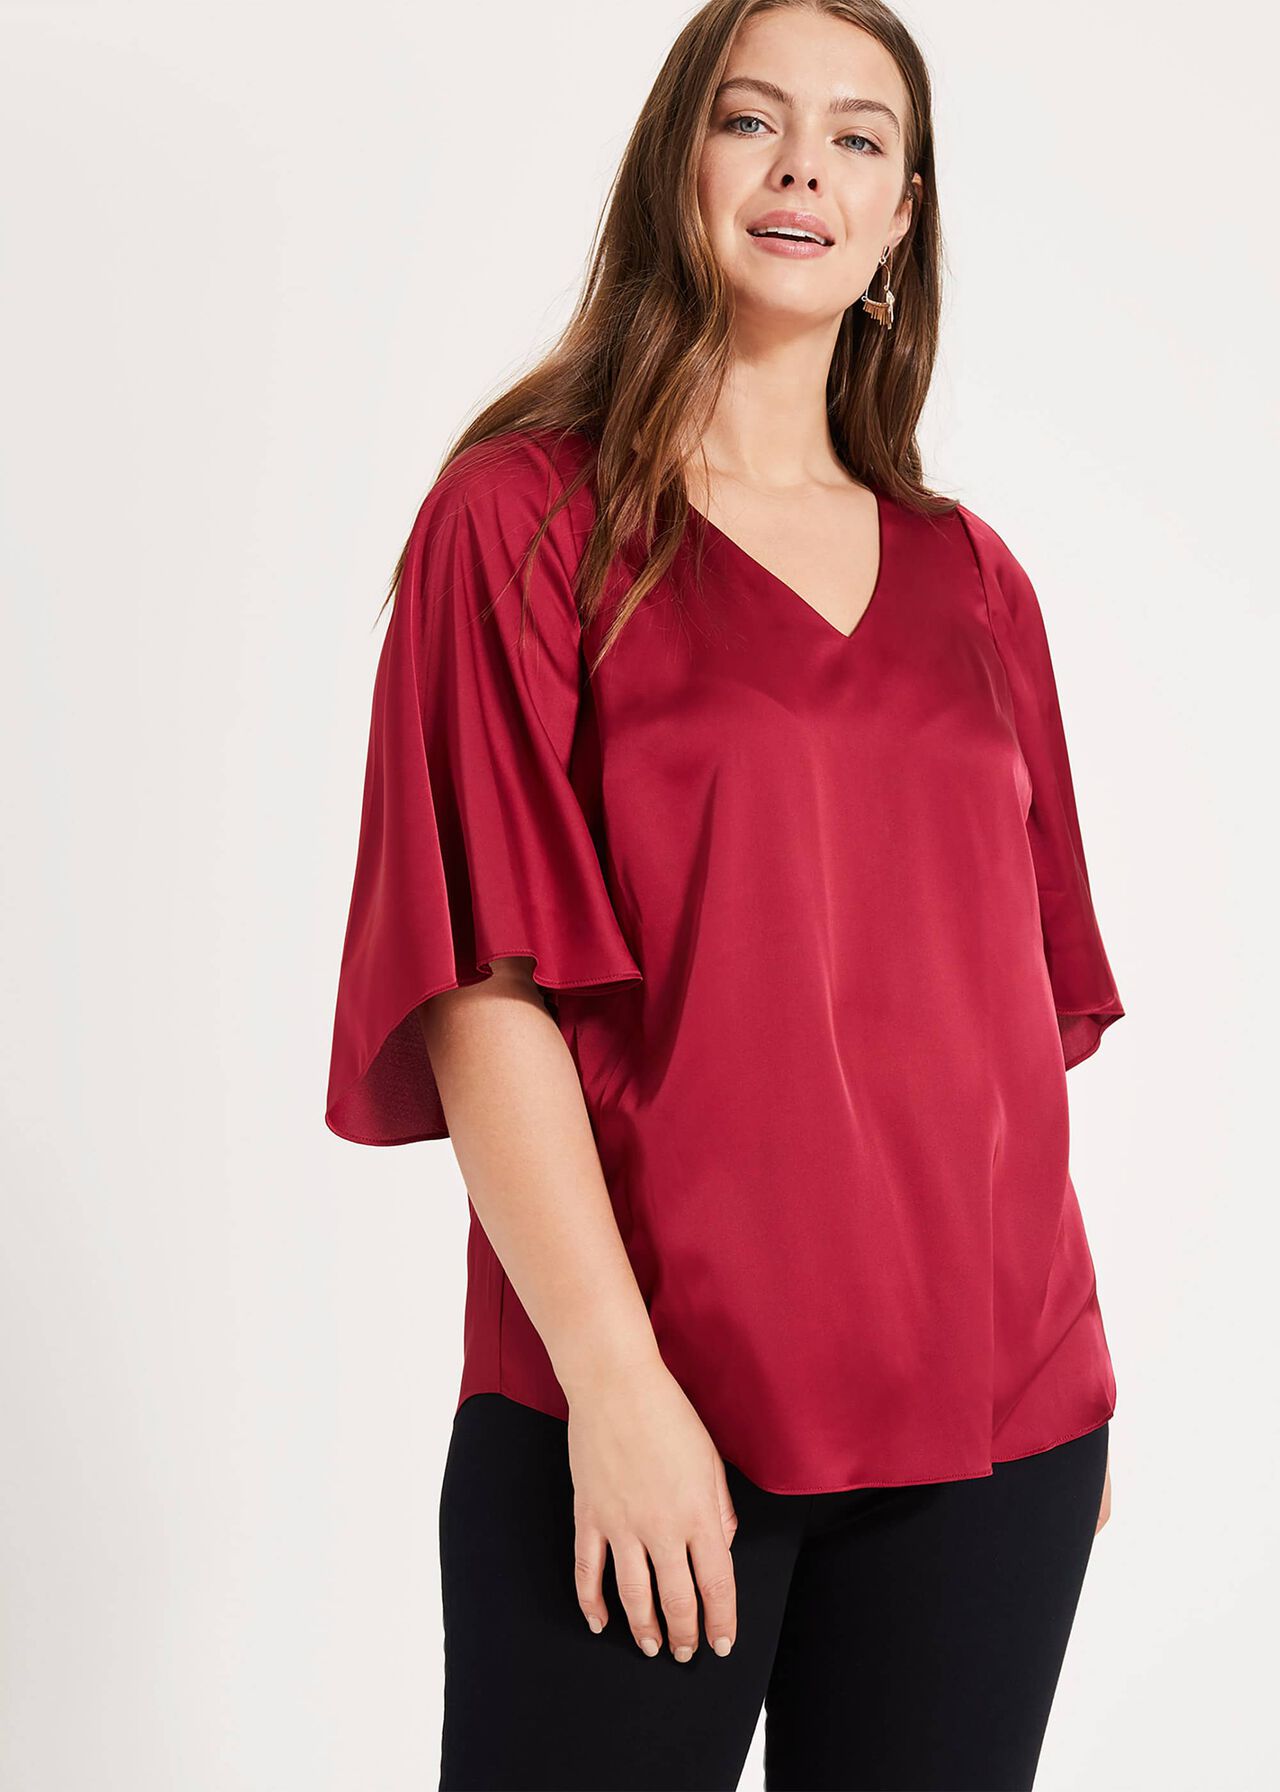 Milly Satin Top